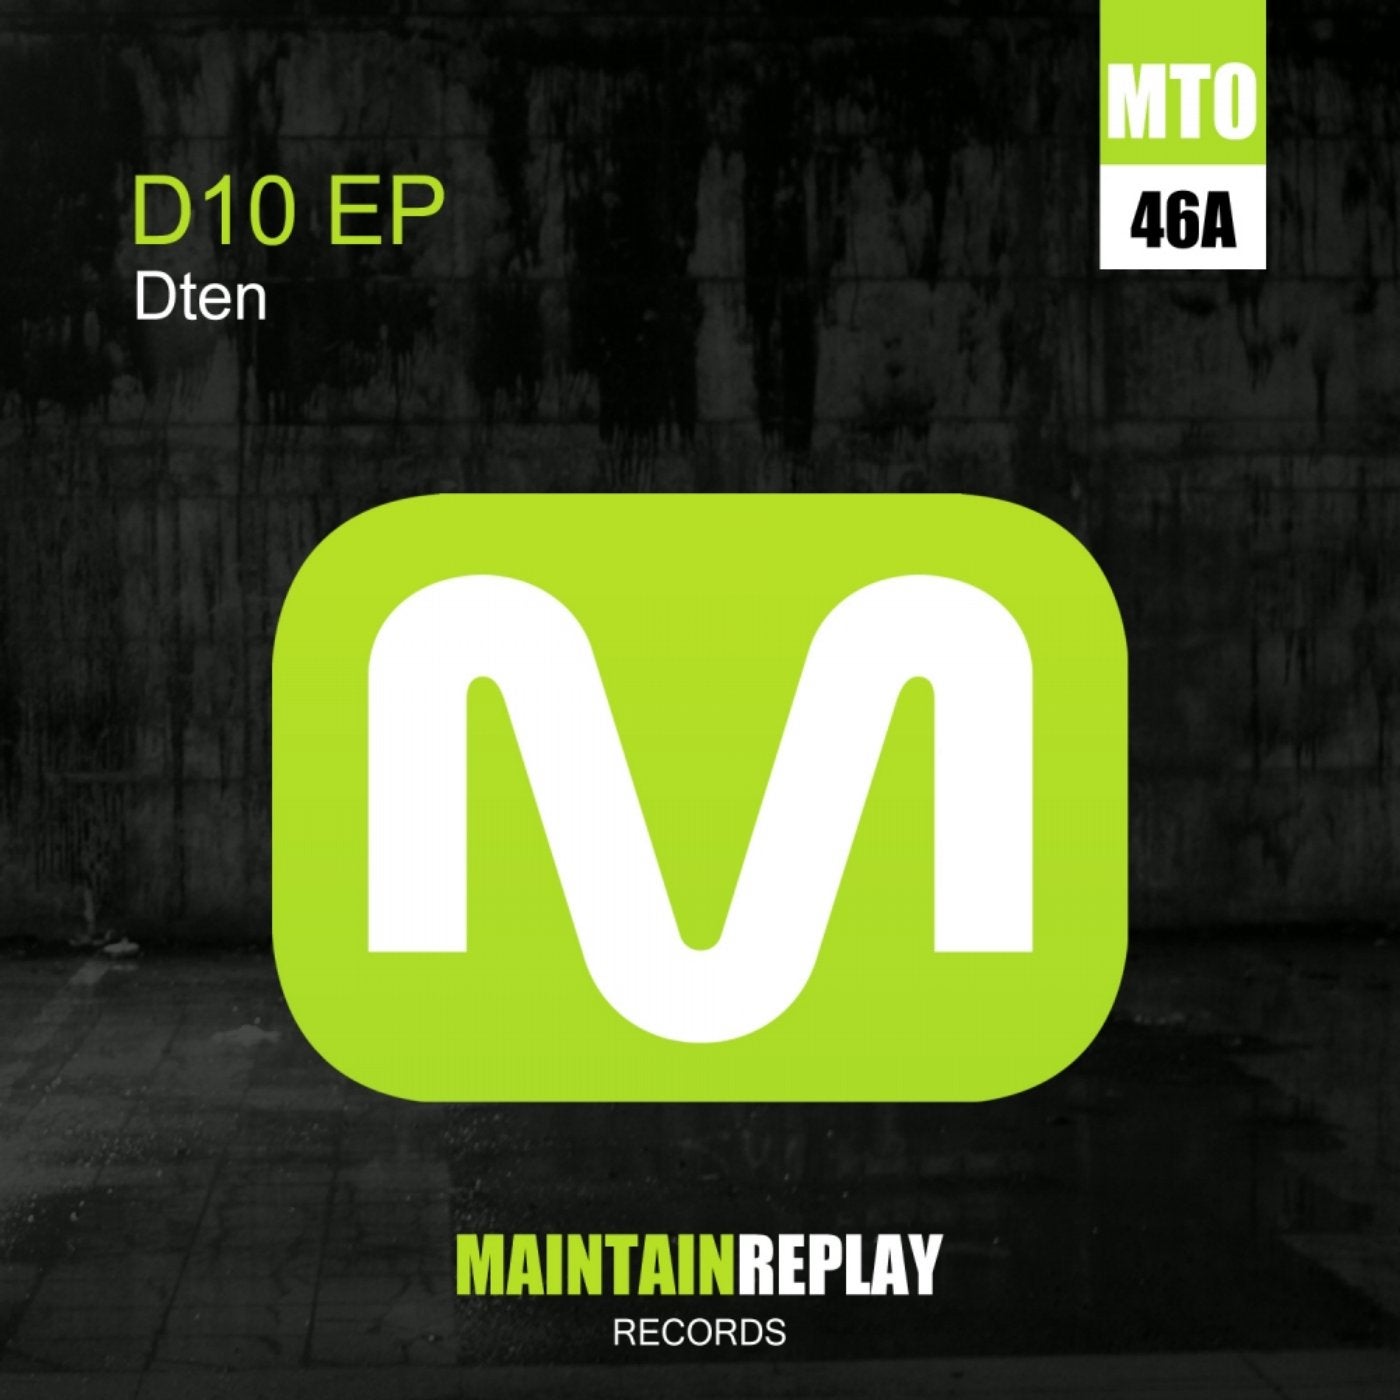 D10 EP